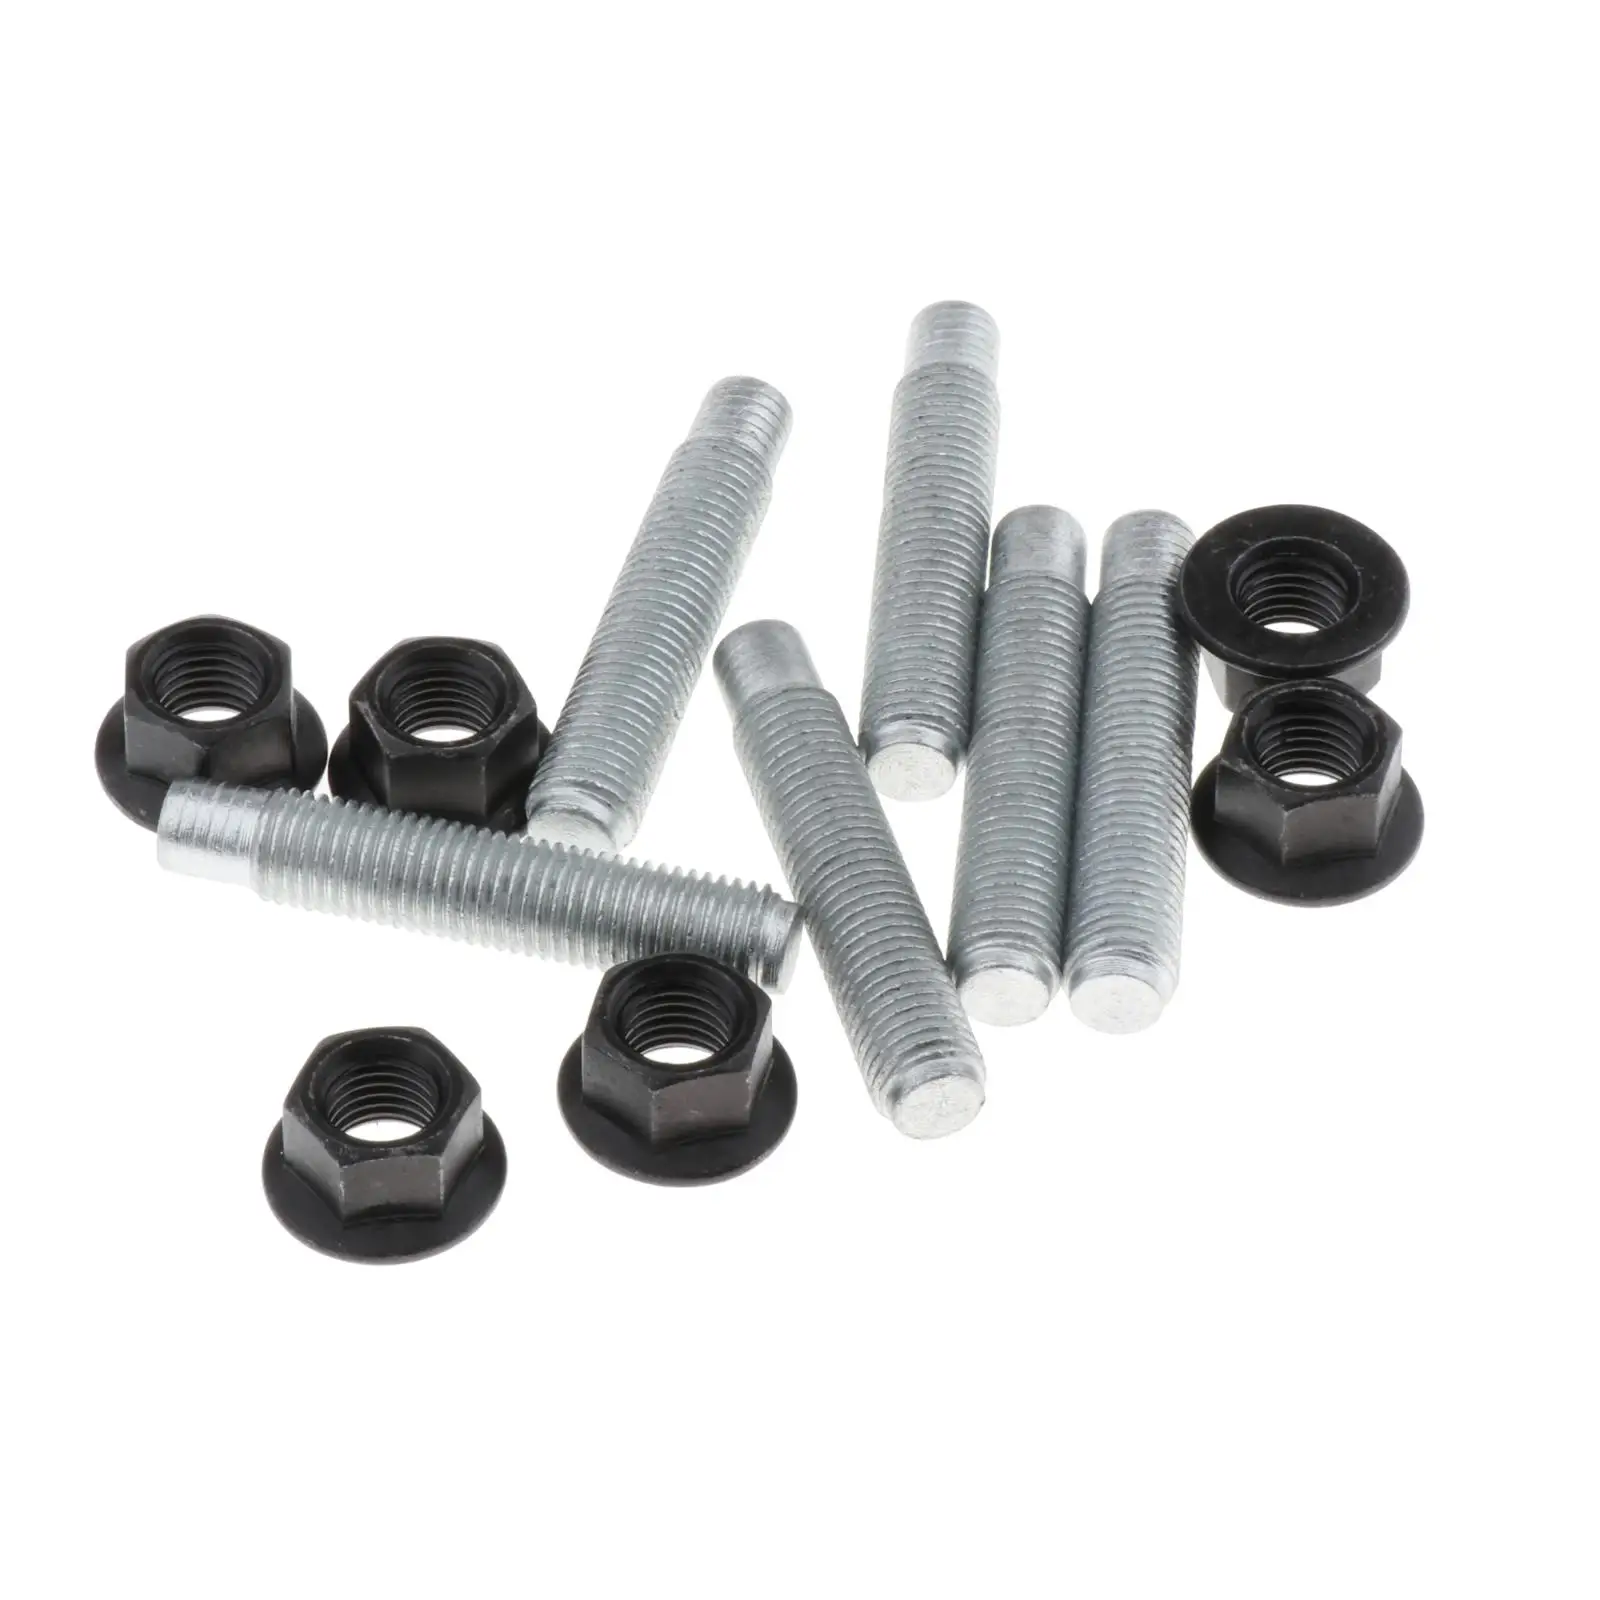 Iron Exhaust Manifold Stud Nut Kit Set Replacement 800910550 902370029 800910390 for   1990-2018  and Outback